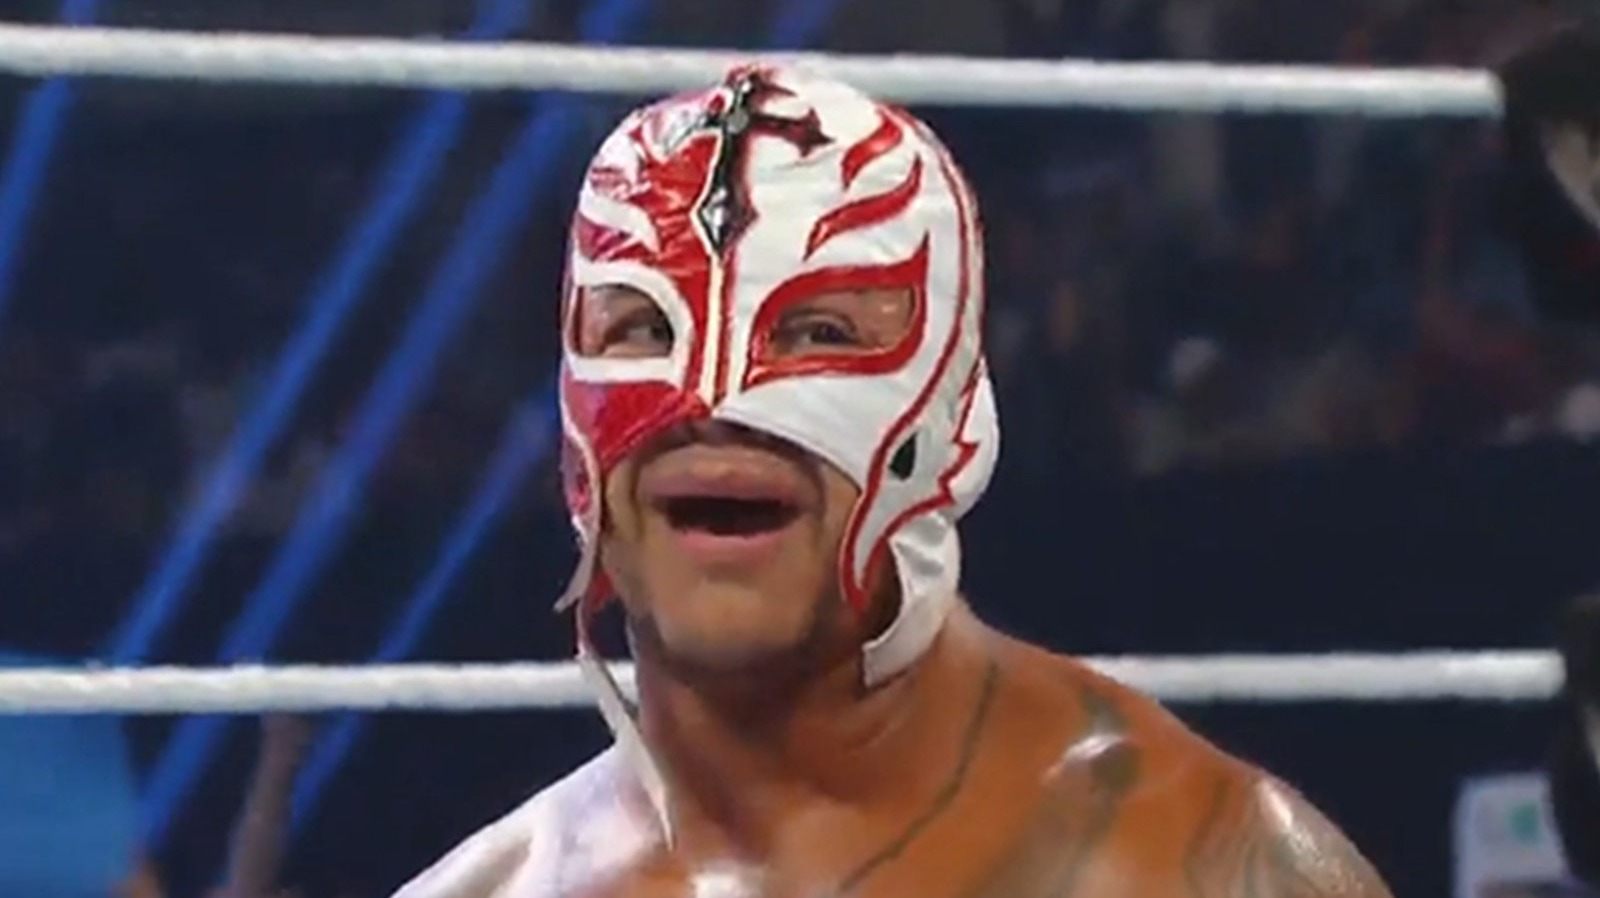 Rey Mysterio And Others Return In The WWE Royal Rumble, Who Won The